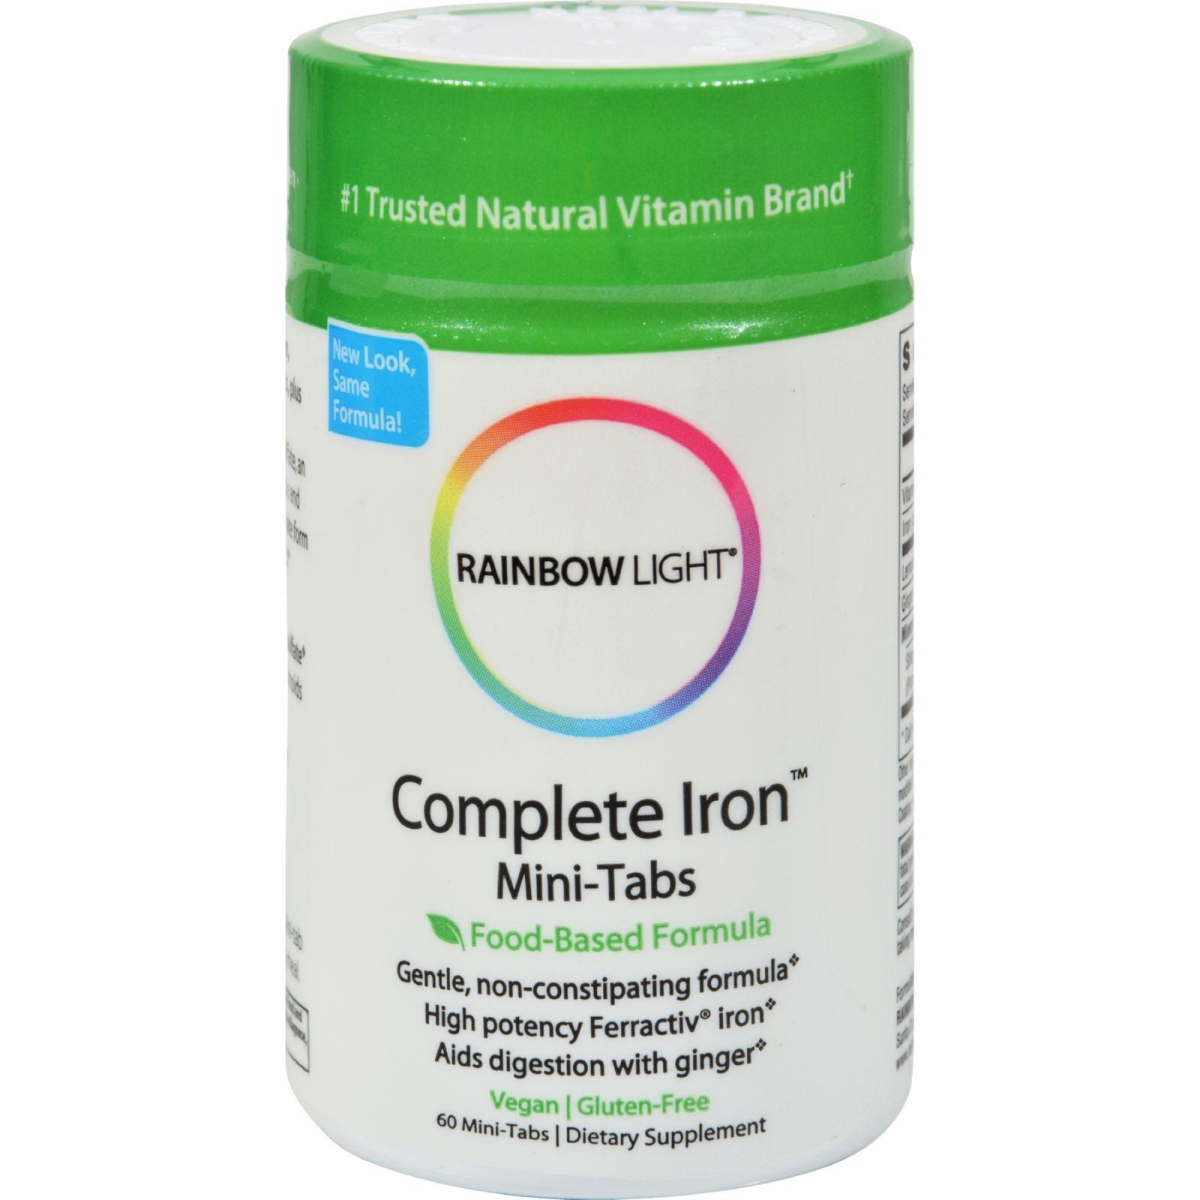 Hg0164400 Complete Iron Mini-tabs, 60 Tablets